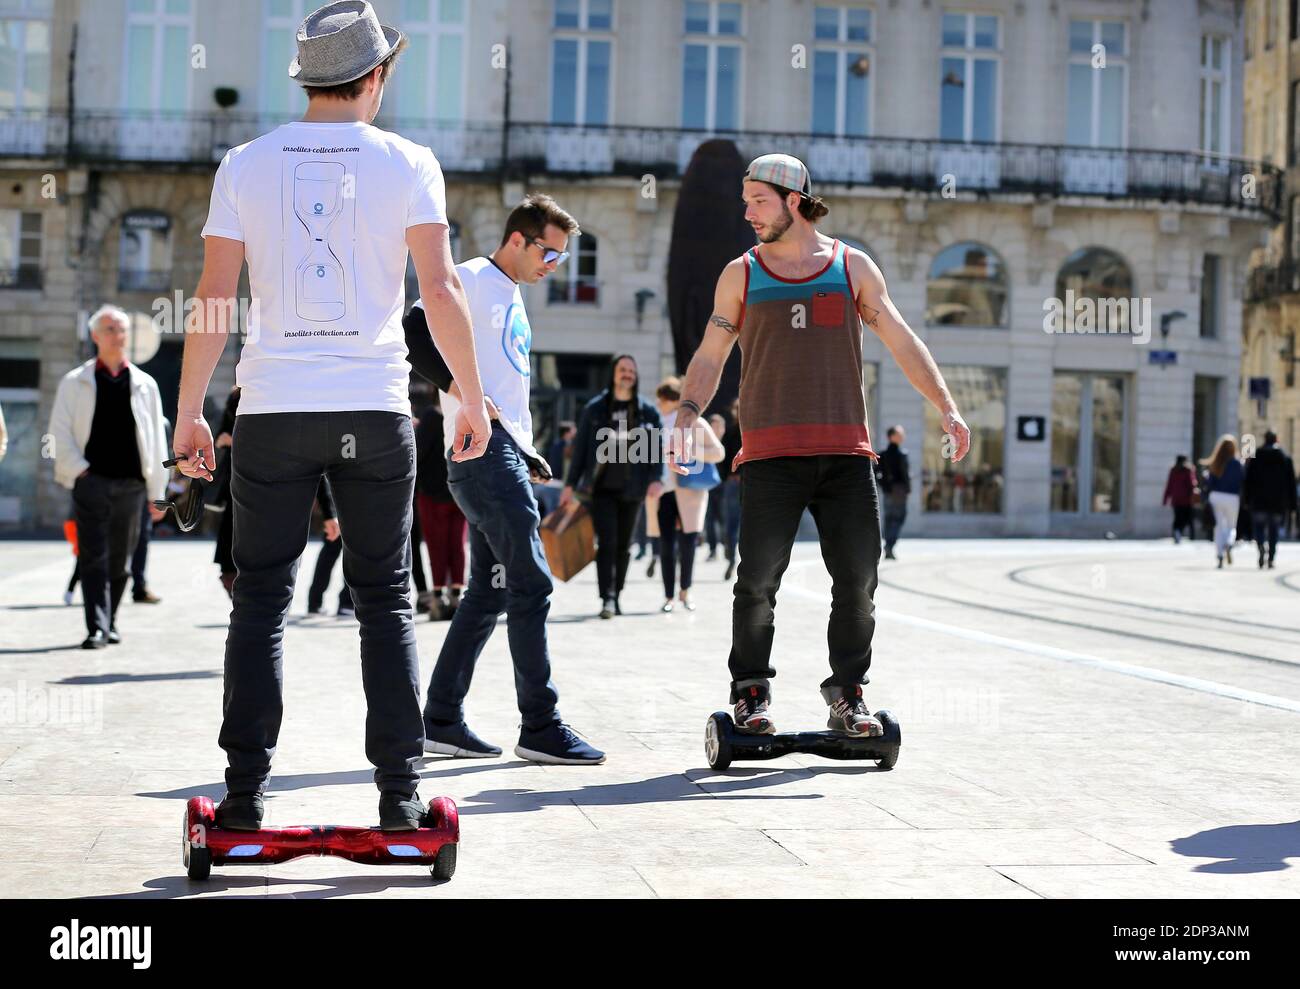 Exclusive. Passers-by test the Hovertrax electric skateboard, a new  motorized means of transportation, on Place de la Comedie square in  Bordeaux, southwestern France on April 7, 2015. The new board comes from